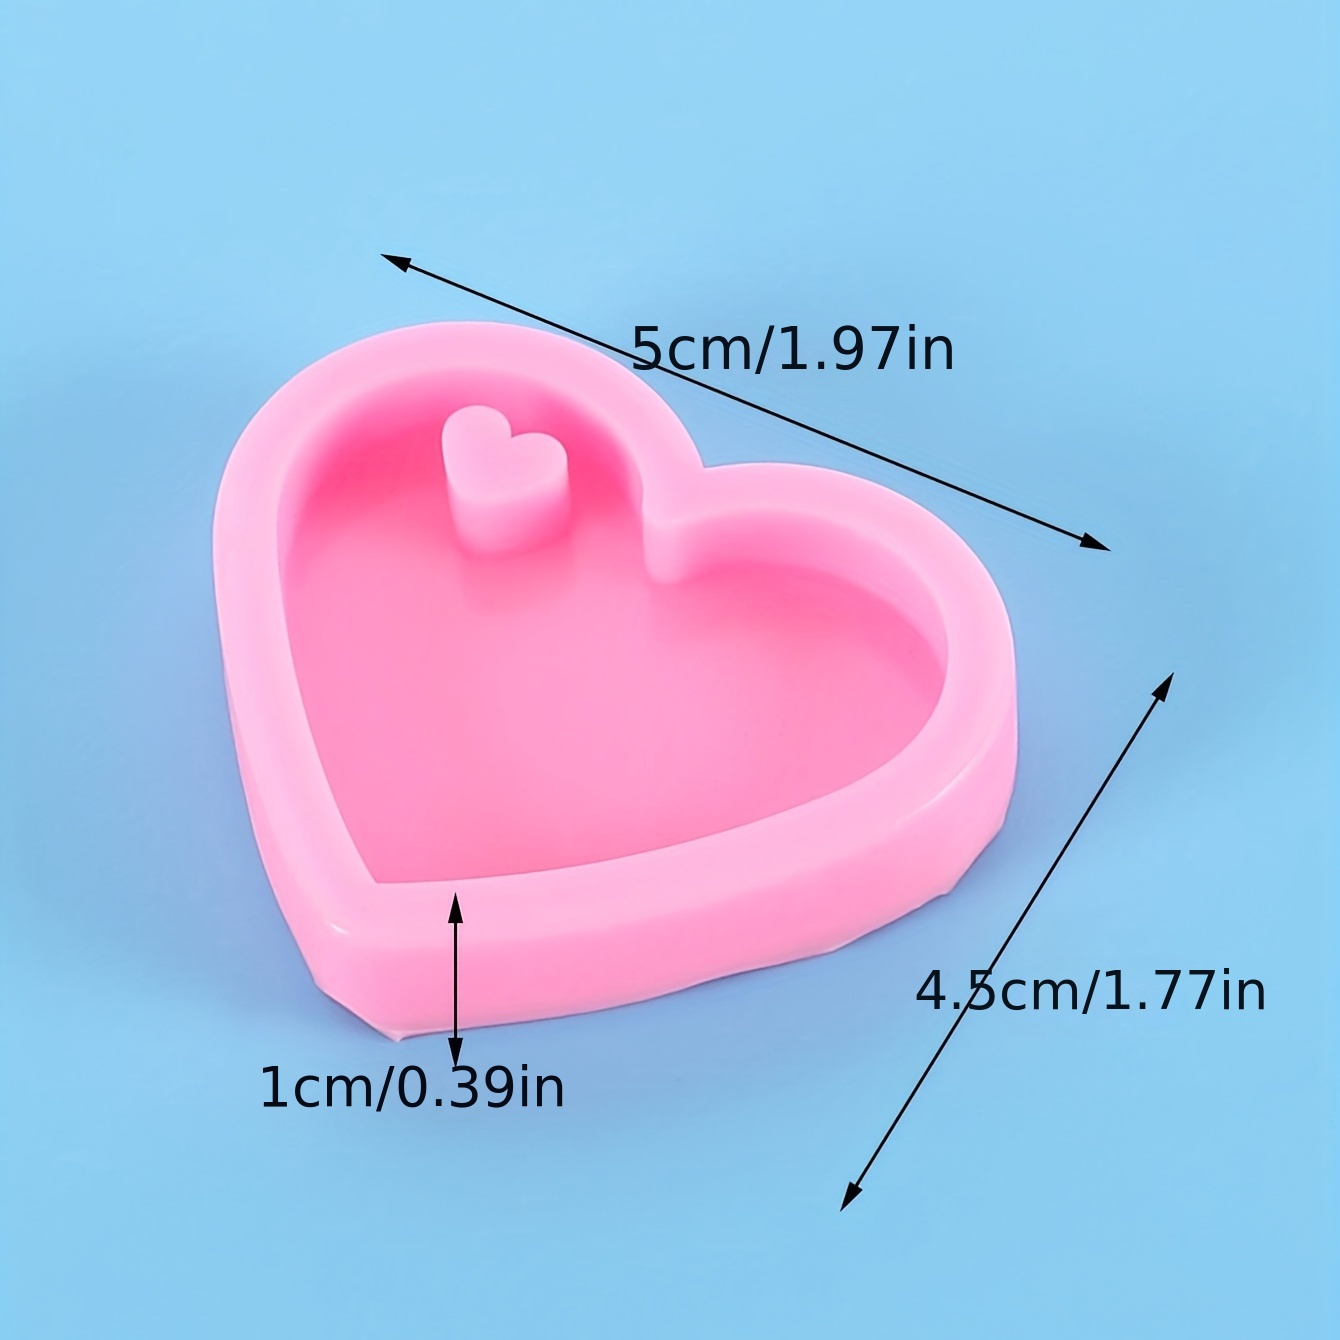 1pc Butterfly Resin Keychain molds, Silicone Epoxy Resin Molds with Hole  for DIY Keychain Necklace Pendant, Clay Crafts, Fondant Chocolate Candy  Cake Decoration